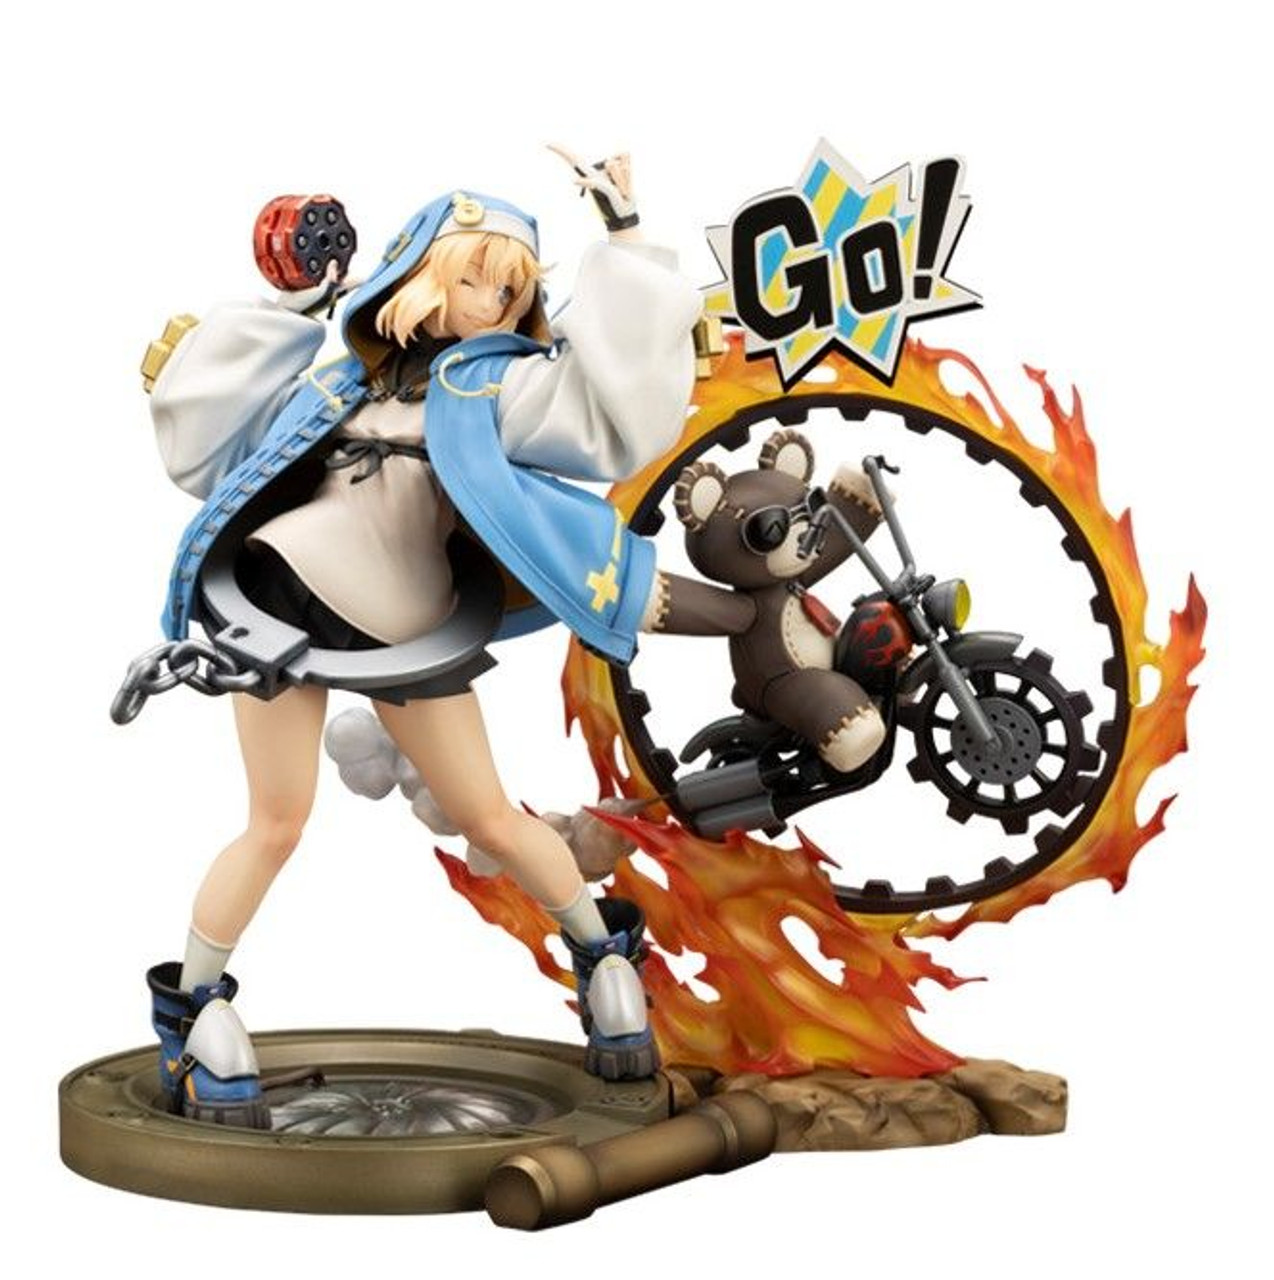 Bridget is coming to Guilty Gear Strive today